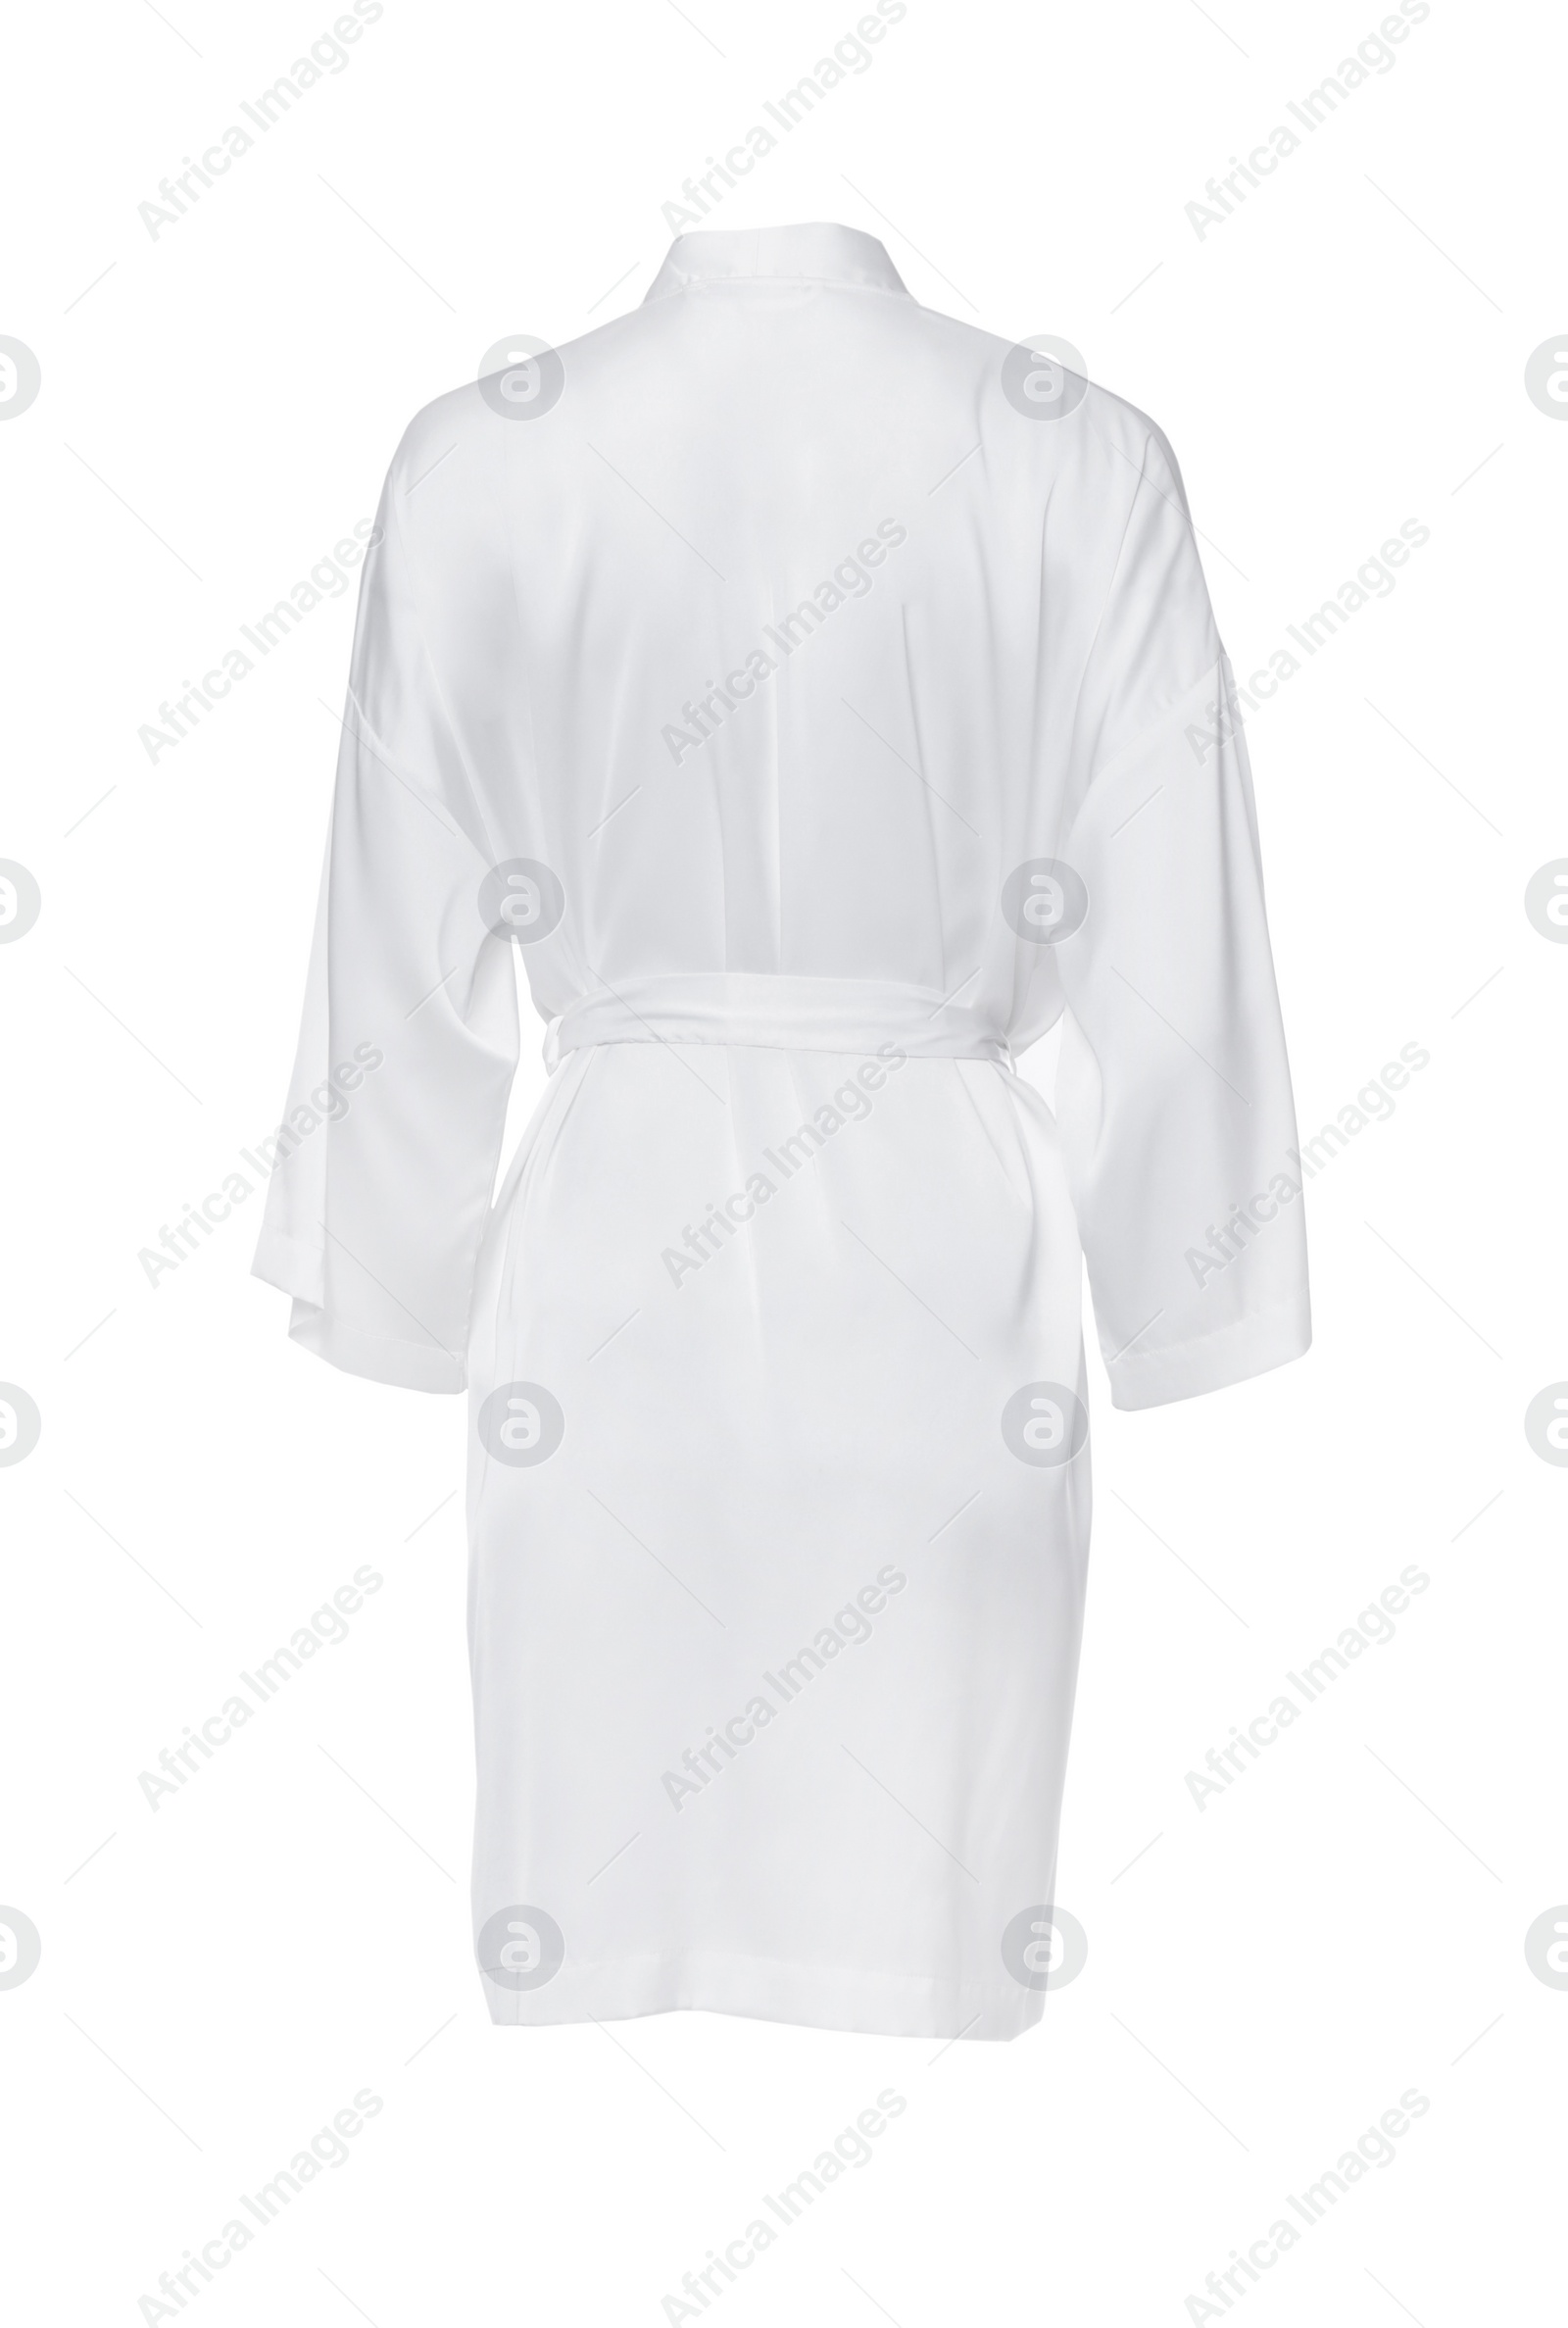 Image of Clean silk bathrobe with belt isolated on white, back view